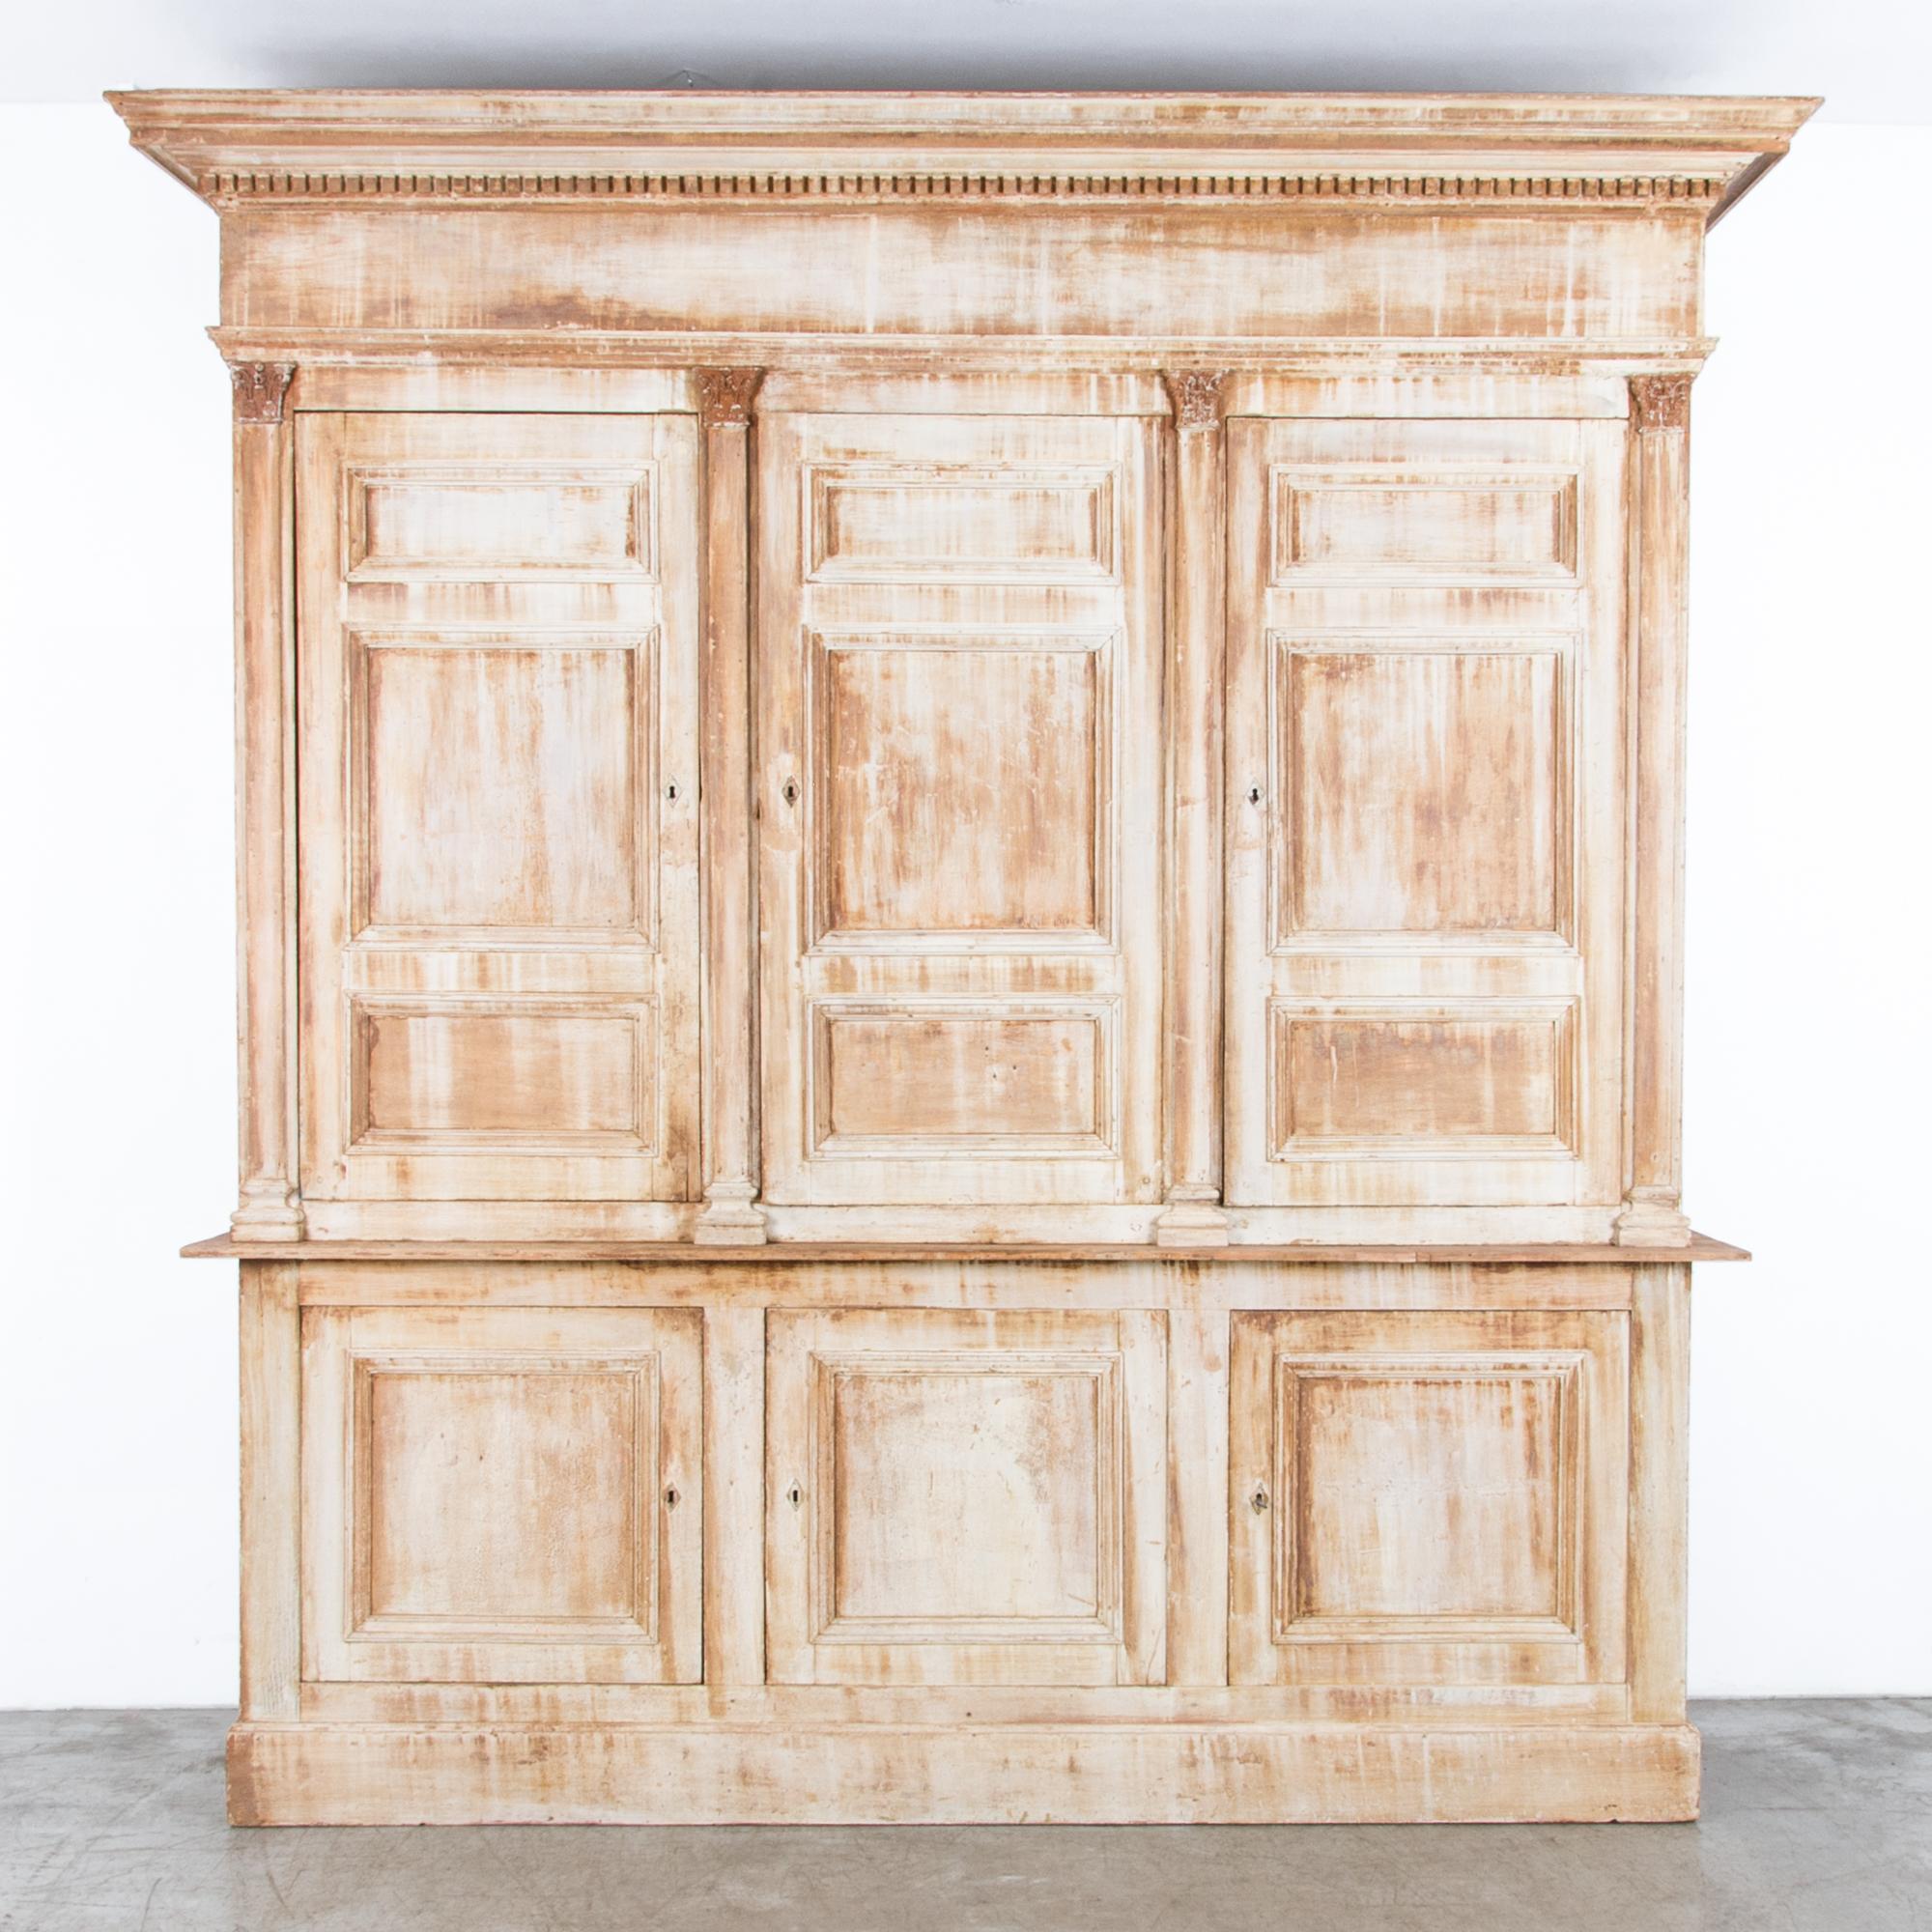 A wooden cabinet from France, circa 1850s, featuring three hinged doors which open onto two interior shelves. On an impressive scale, the neoclassical influence is enhanced by the distinctive mottled patina, while the interior has been repainted in